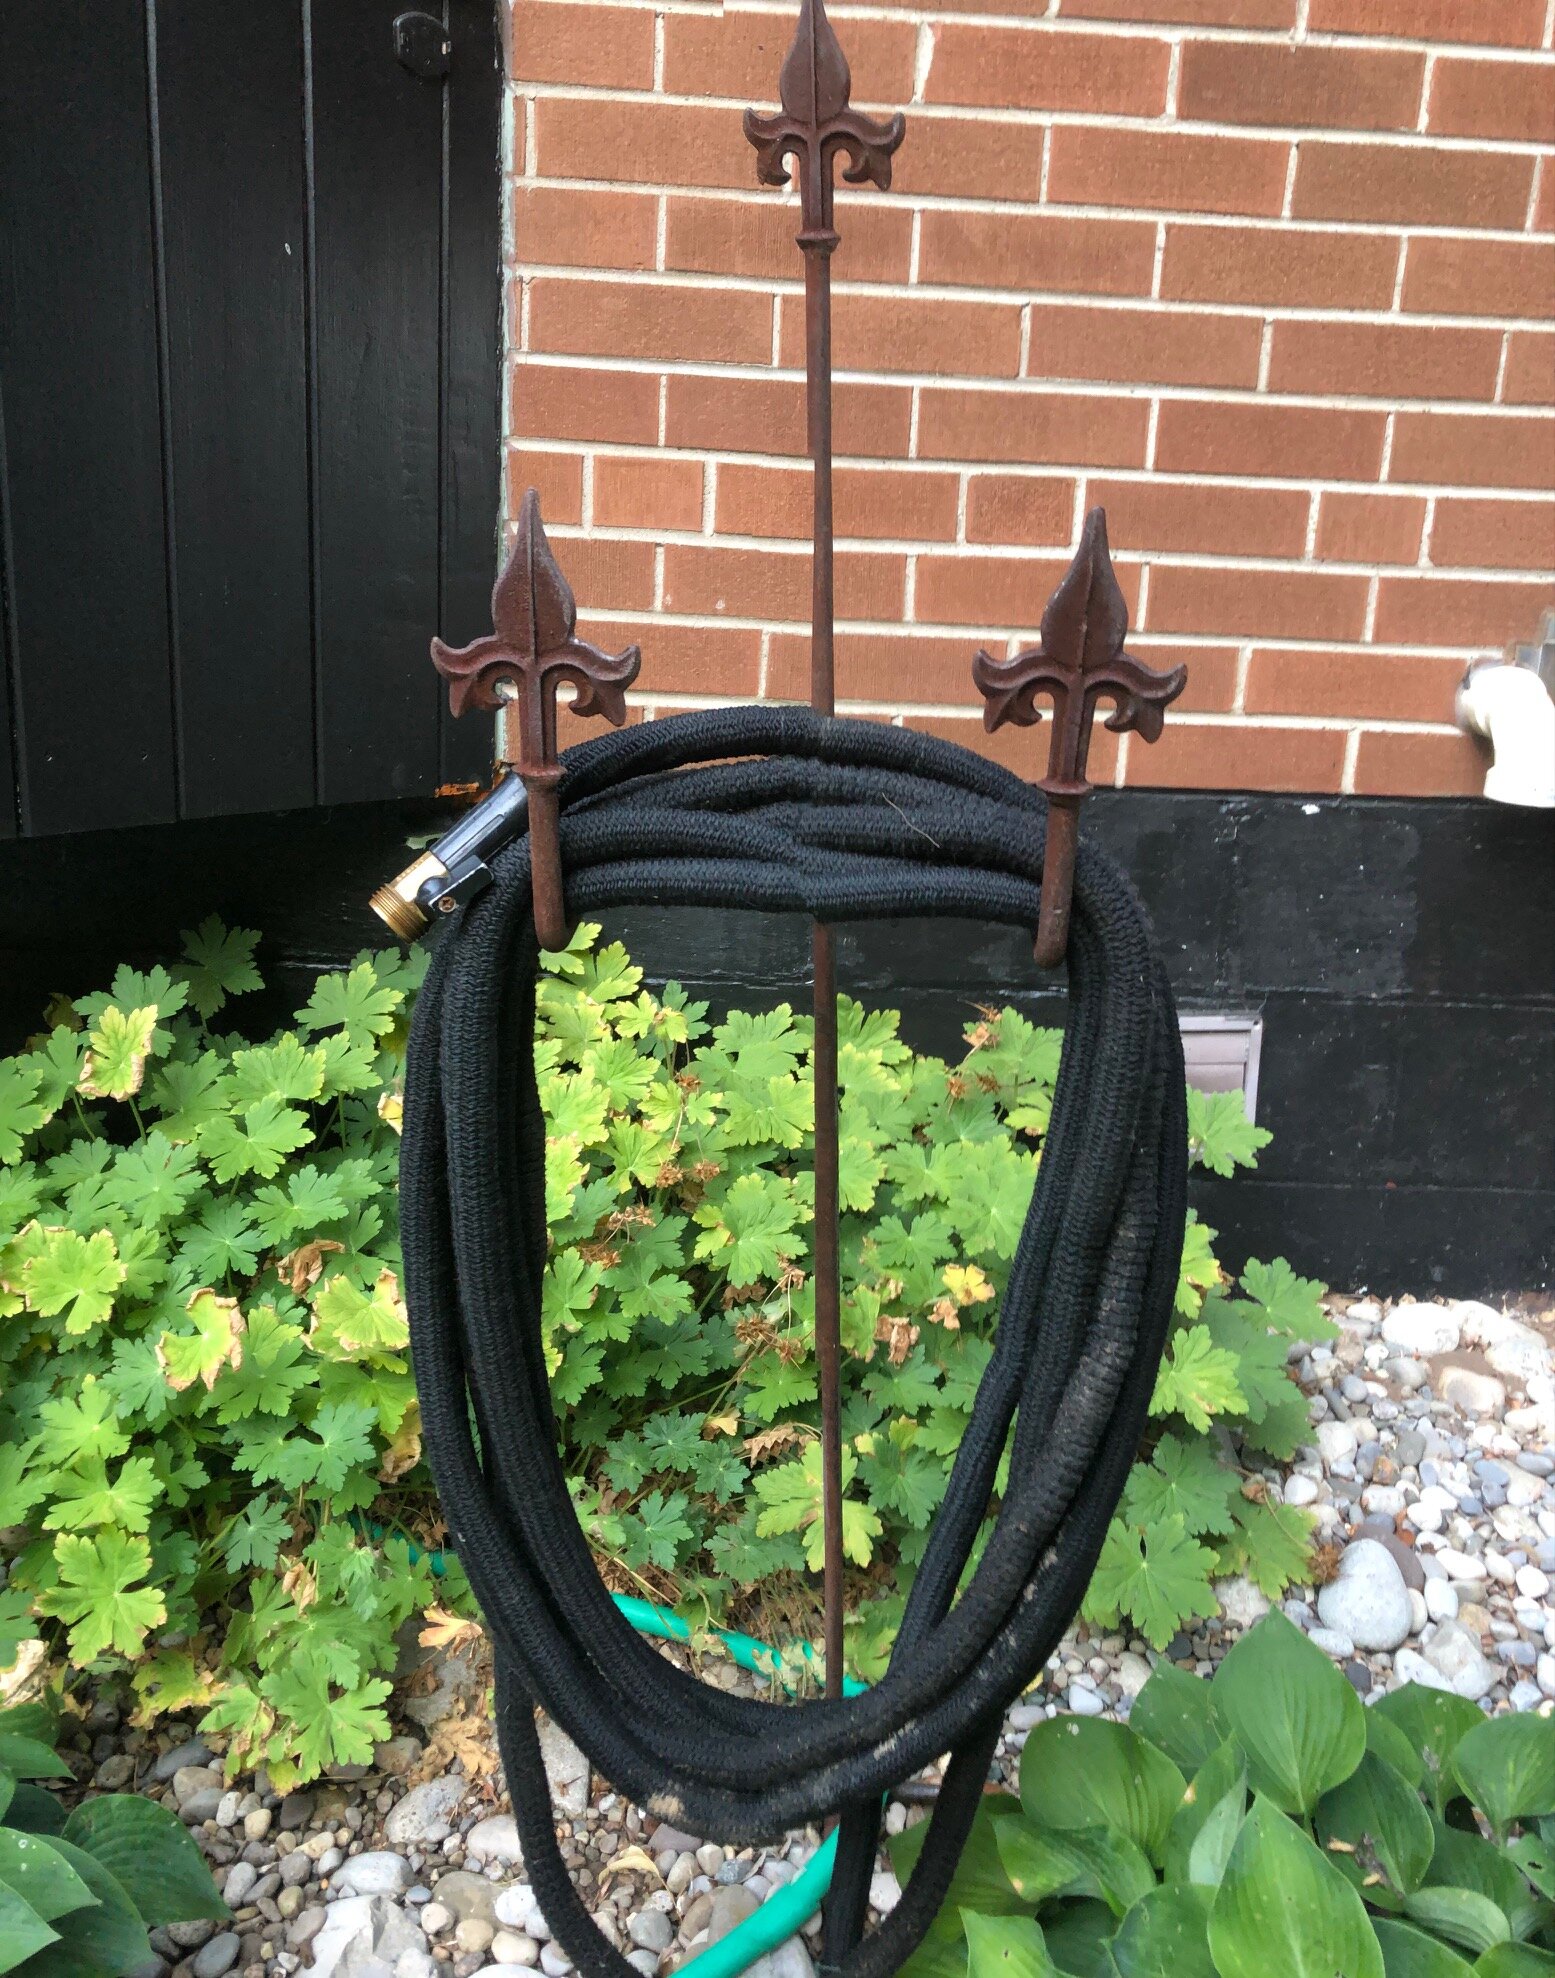 Our expandable garden hose that I don’t think I can live without after years of fighting with traditional garden hoses.